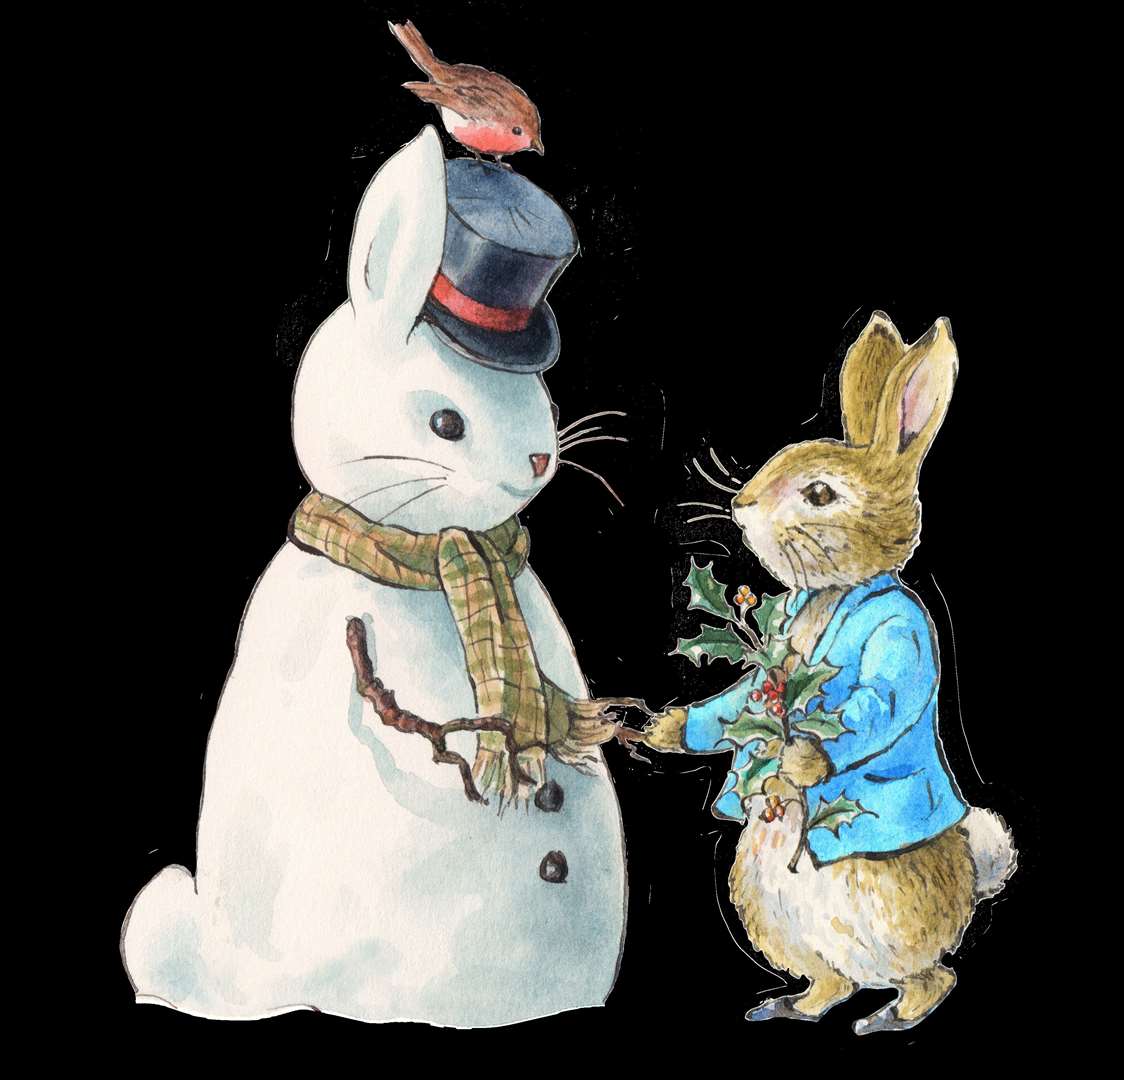 Peter Rabbit features in the National Trust's Christmas trail and activity Picture: F Warne & Co Ltd